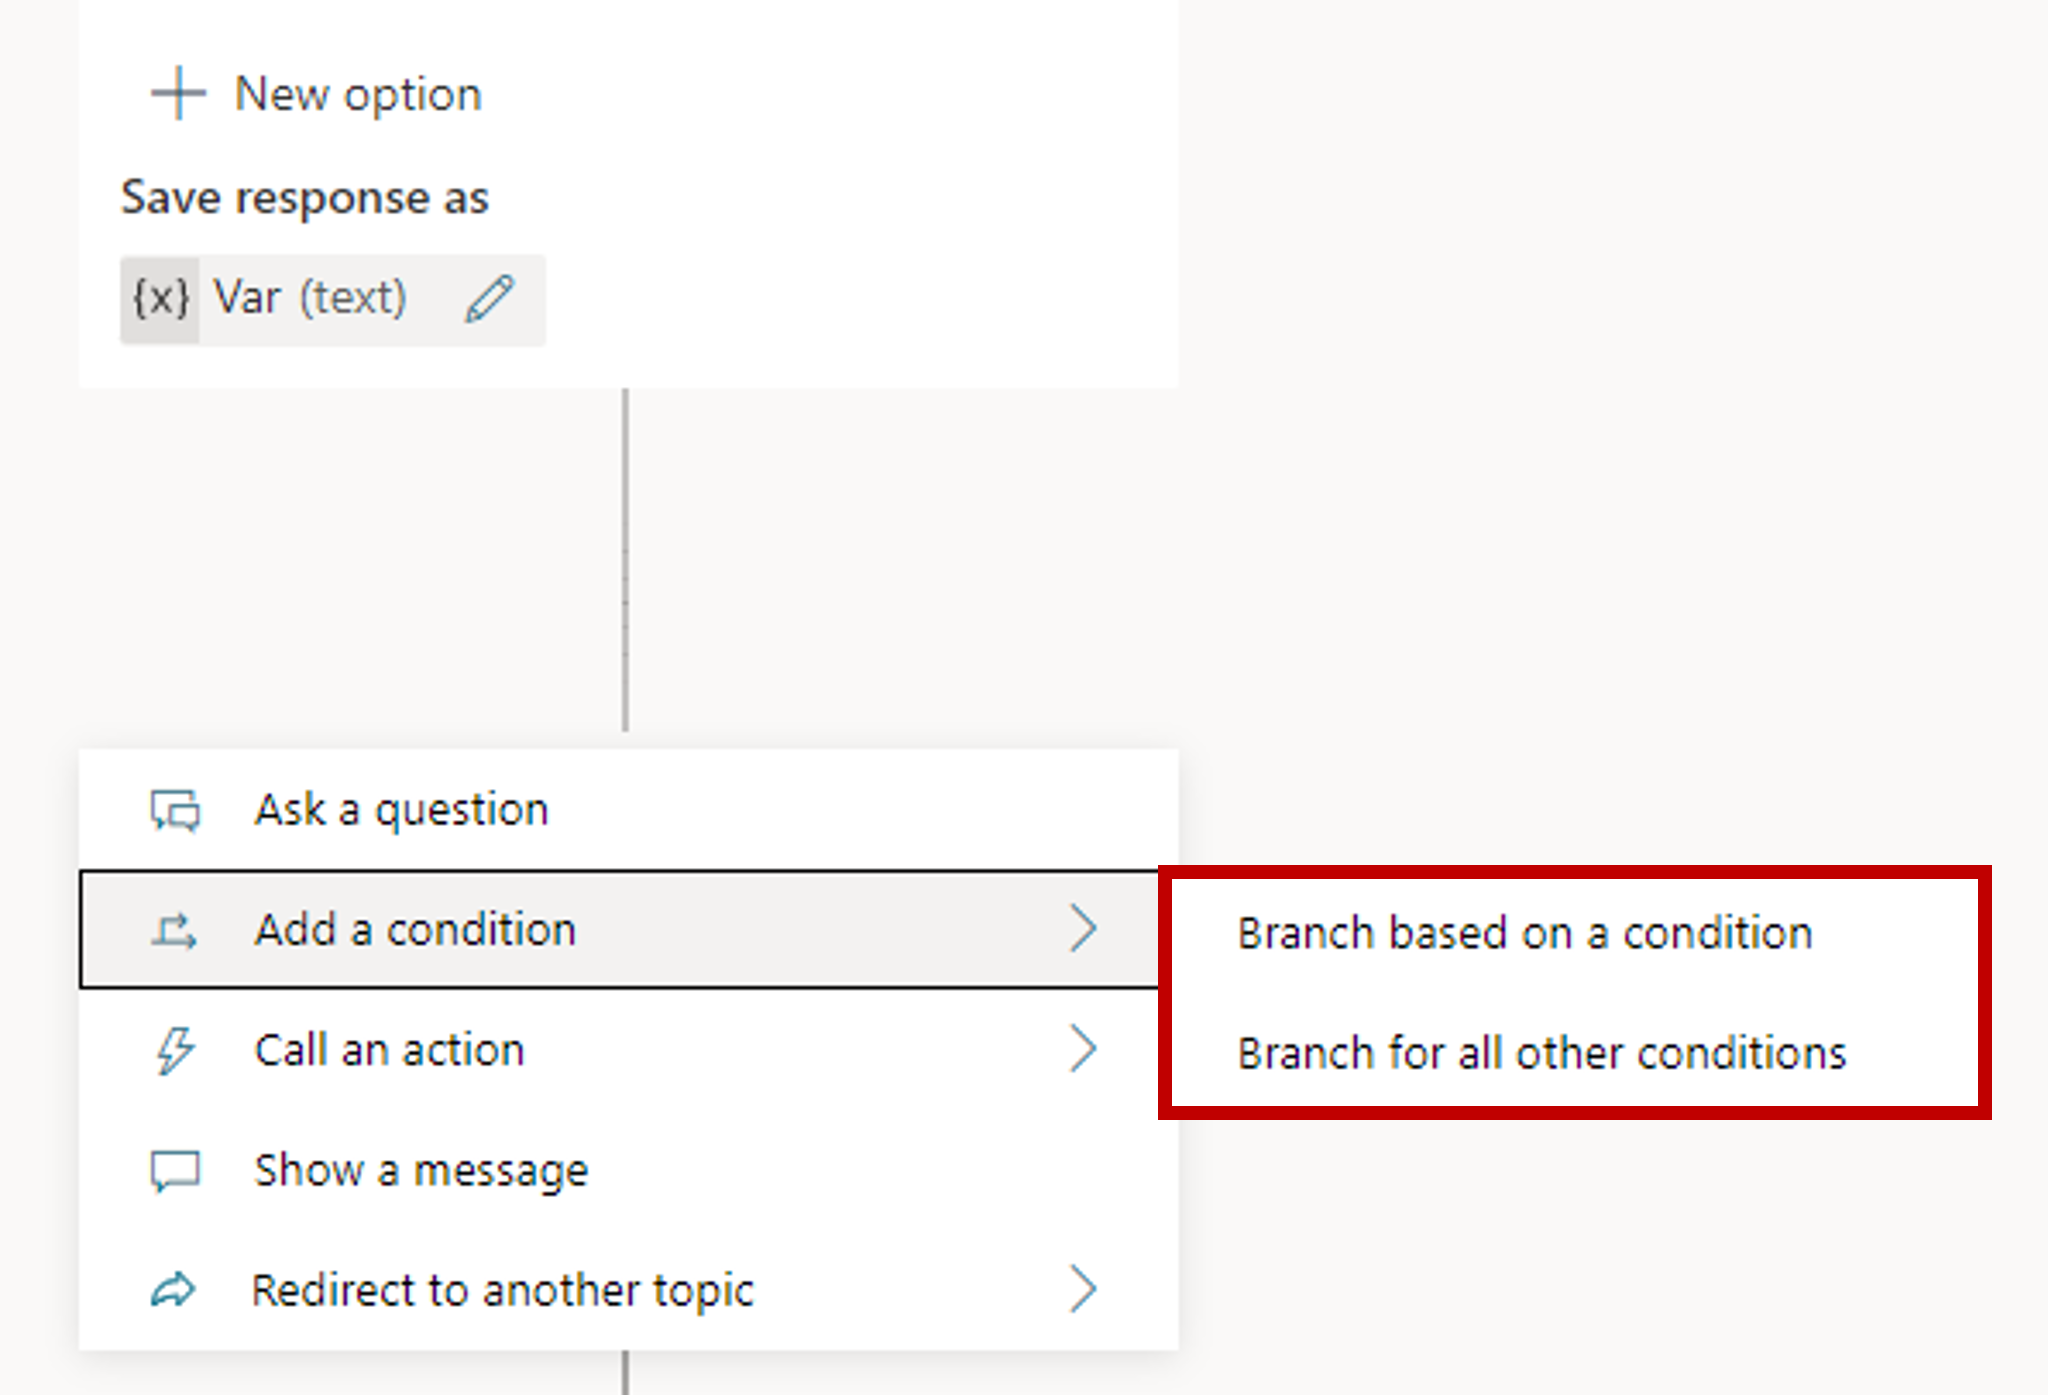 Screenshot of the Add a condition option expanded to show Branch based on a condition and Branch for all other conditions options.